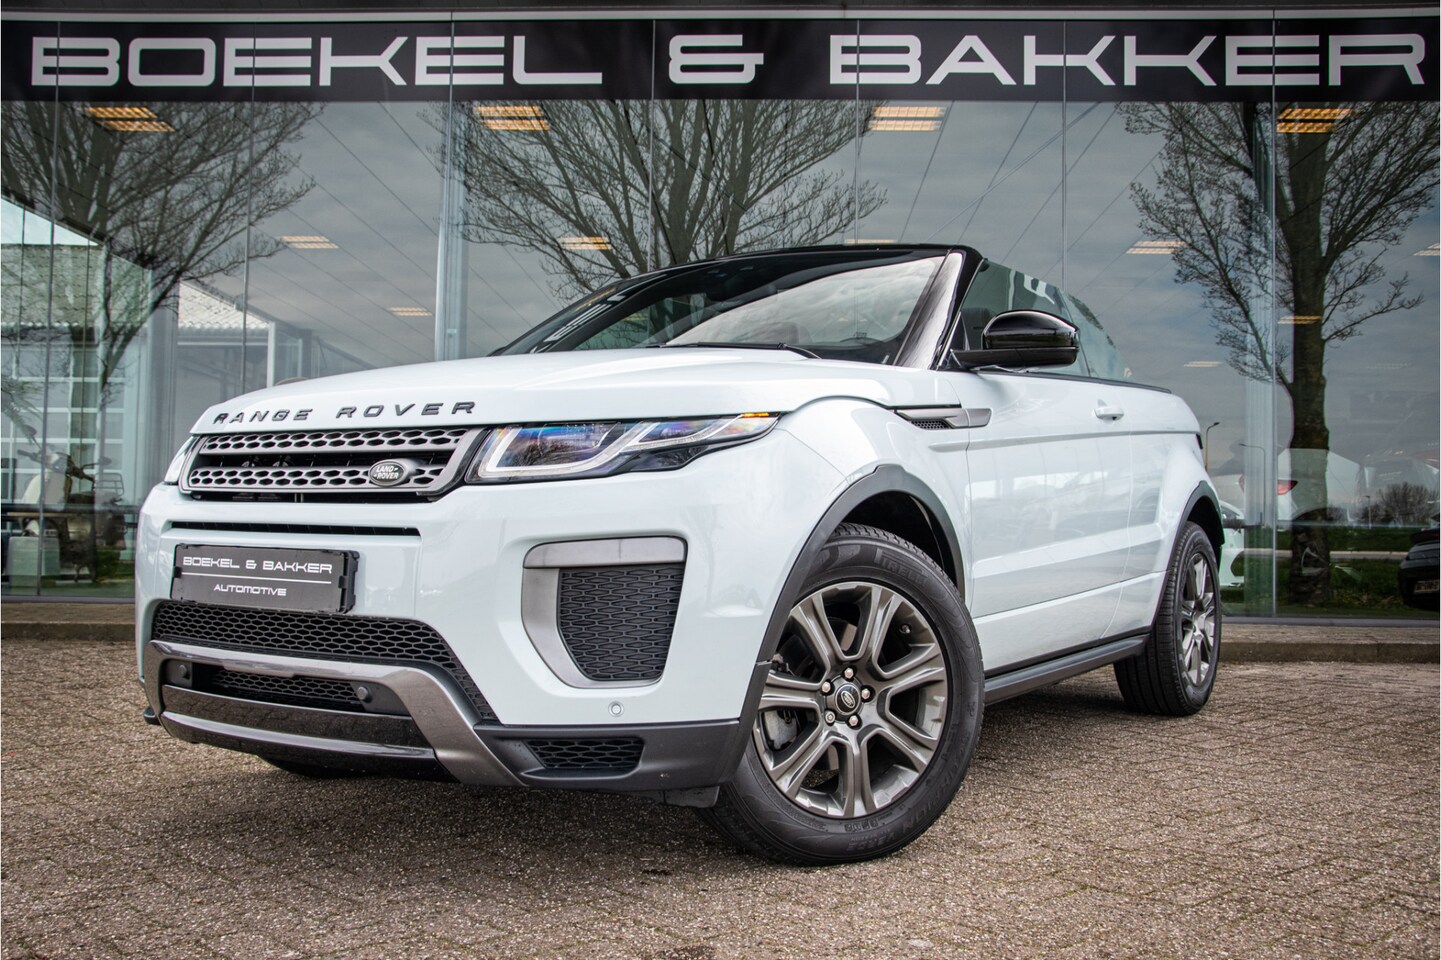 schommel fort Defecte land rover range rover evoque cabrio netherlands used – Search for your  used car on the parking